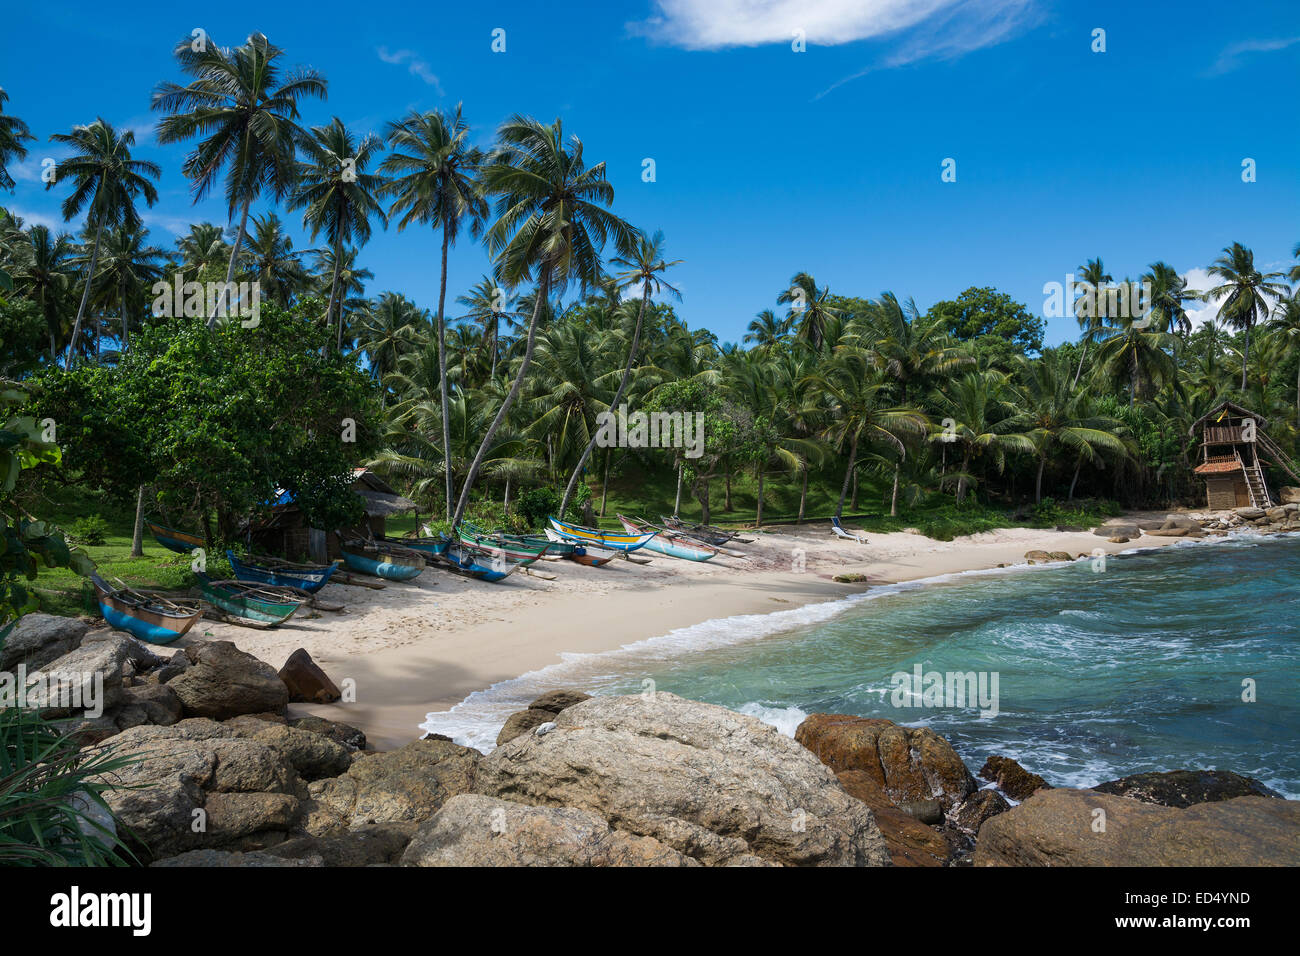 Tropical rocky beach with coconut palm trees, sandy beach and traditional fishing boats. Rocky Point, Tangalle, Sri Lanka Stock Photo